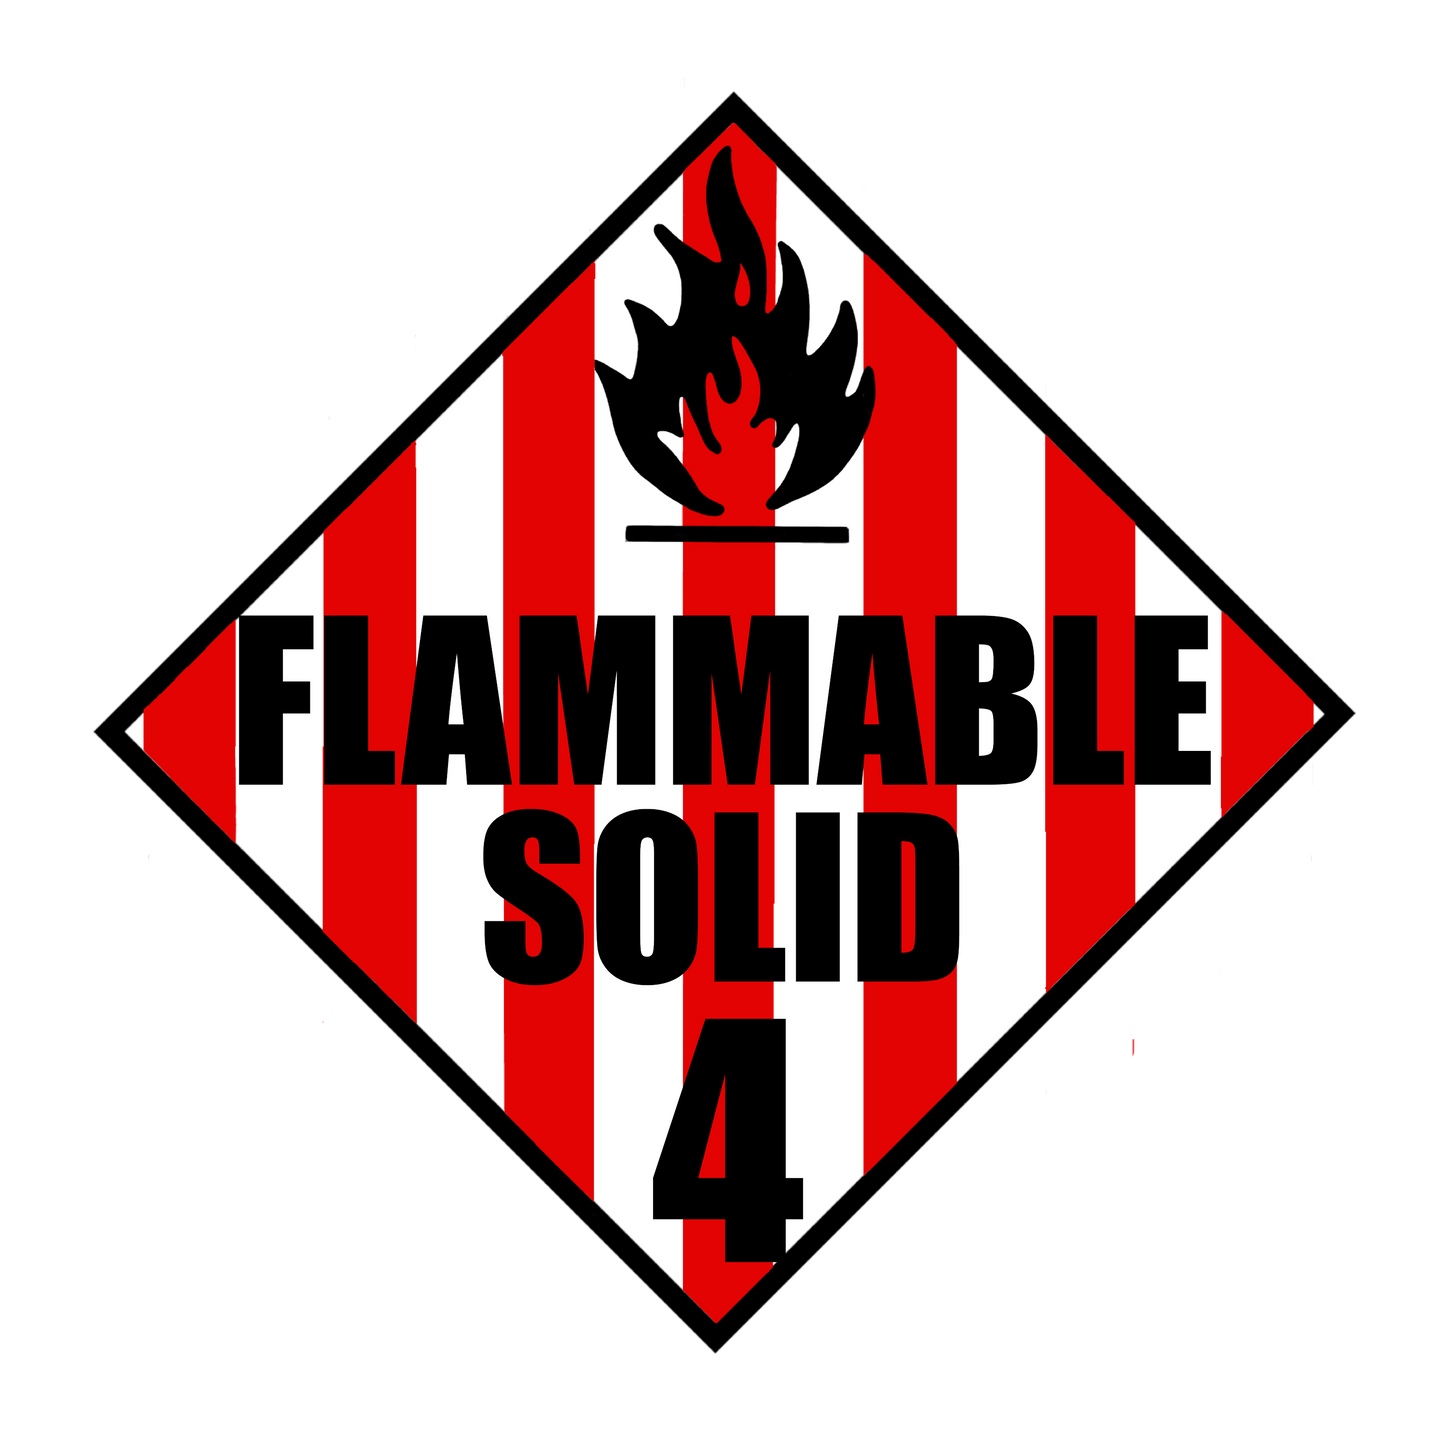 "Flammable Solid" Tee Shirt Design (Math & Science)